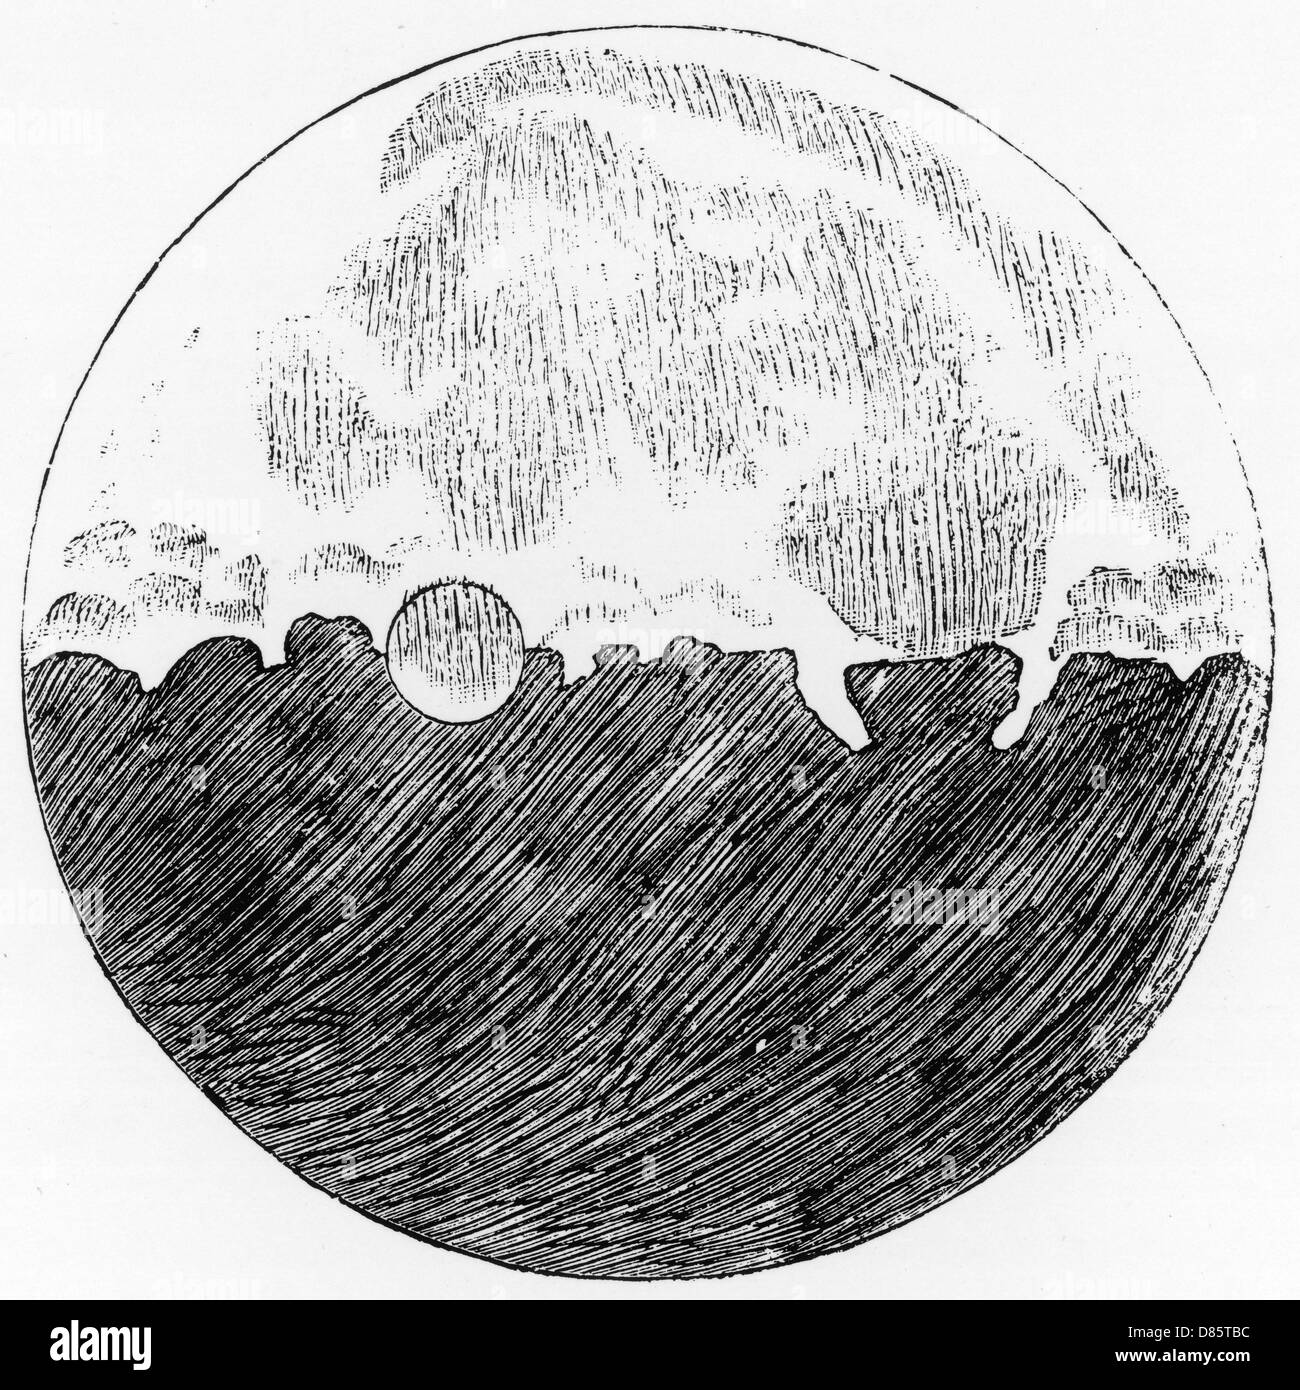 Lunar surface sketched by Galileo Stock Photo